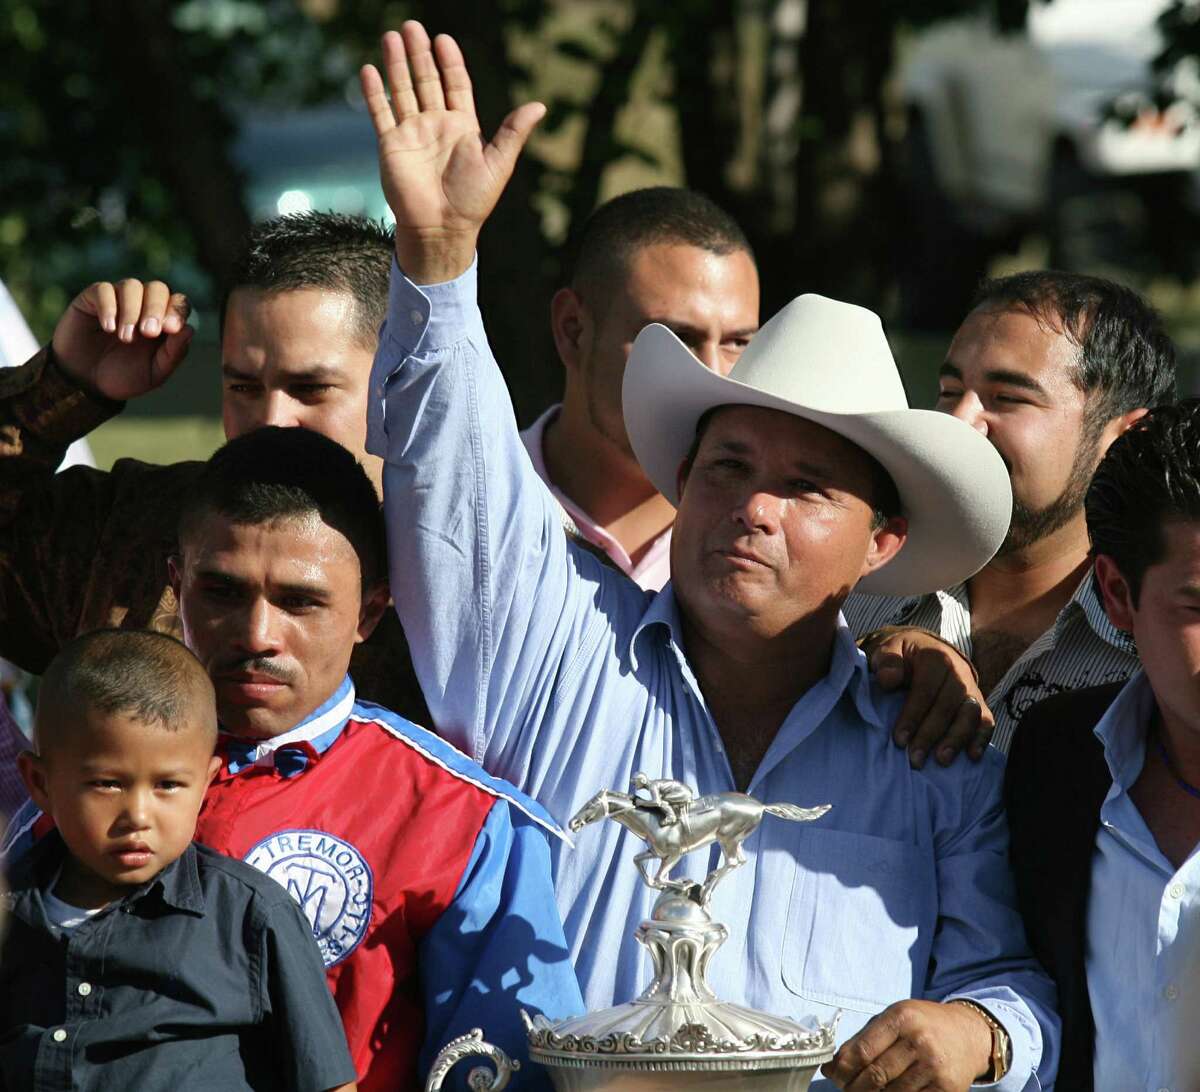 José Treviño Morales, brother of the Zetas' leader, acknowledges the crowd after his horse, Mr. Piloto, won the All American Futurity race at New Mexico in September 2010.